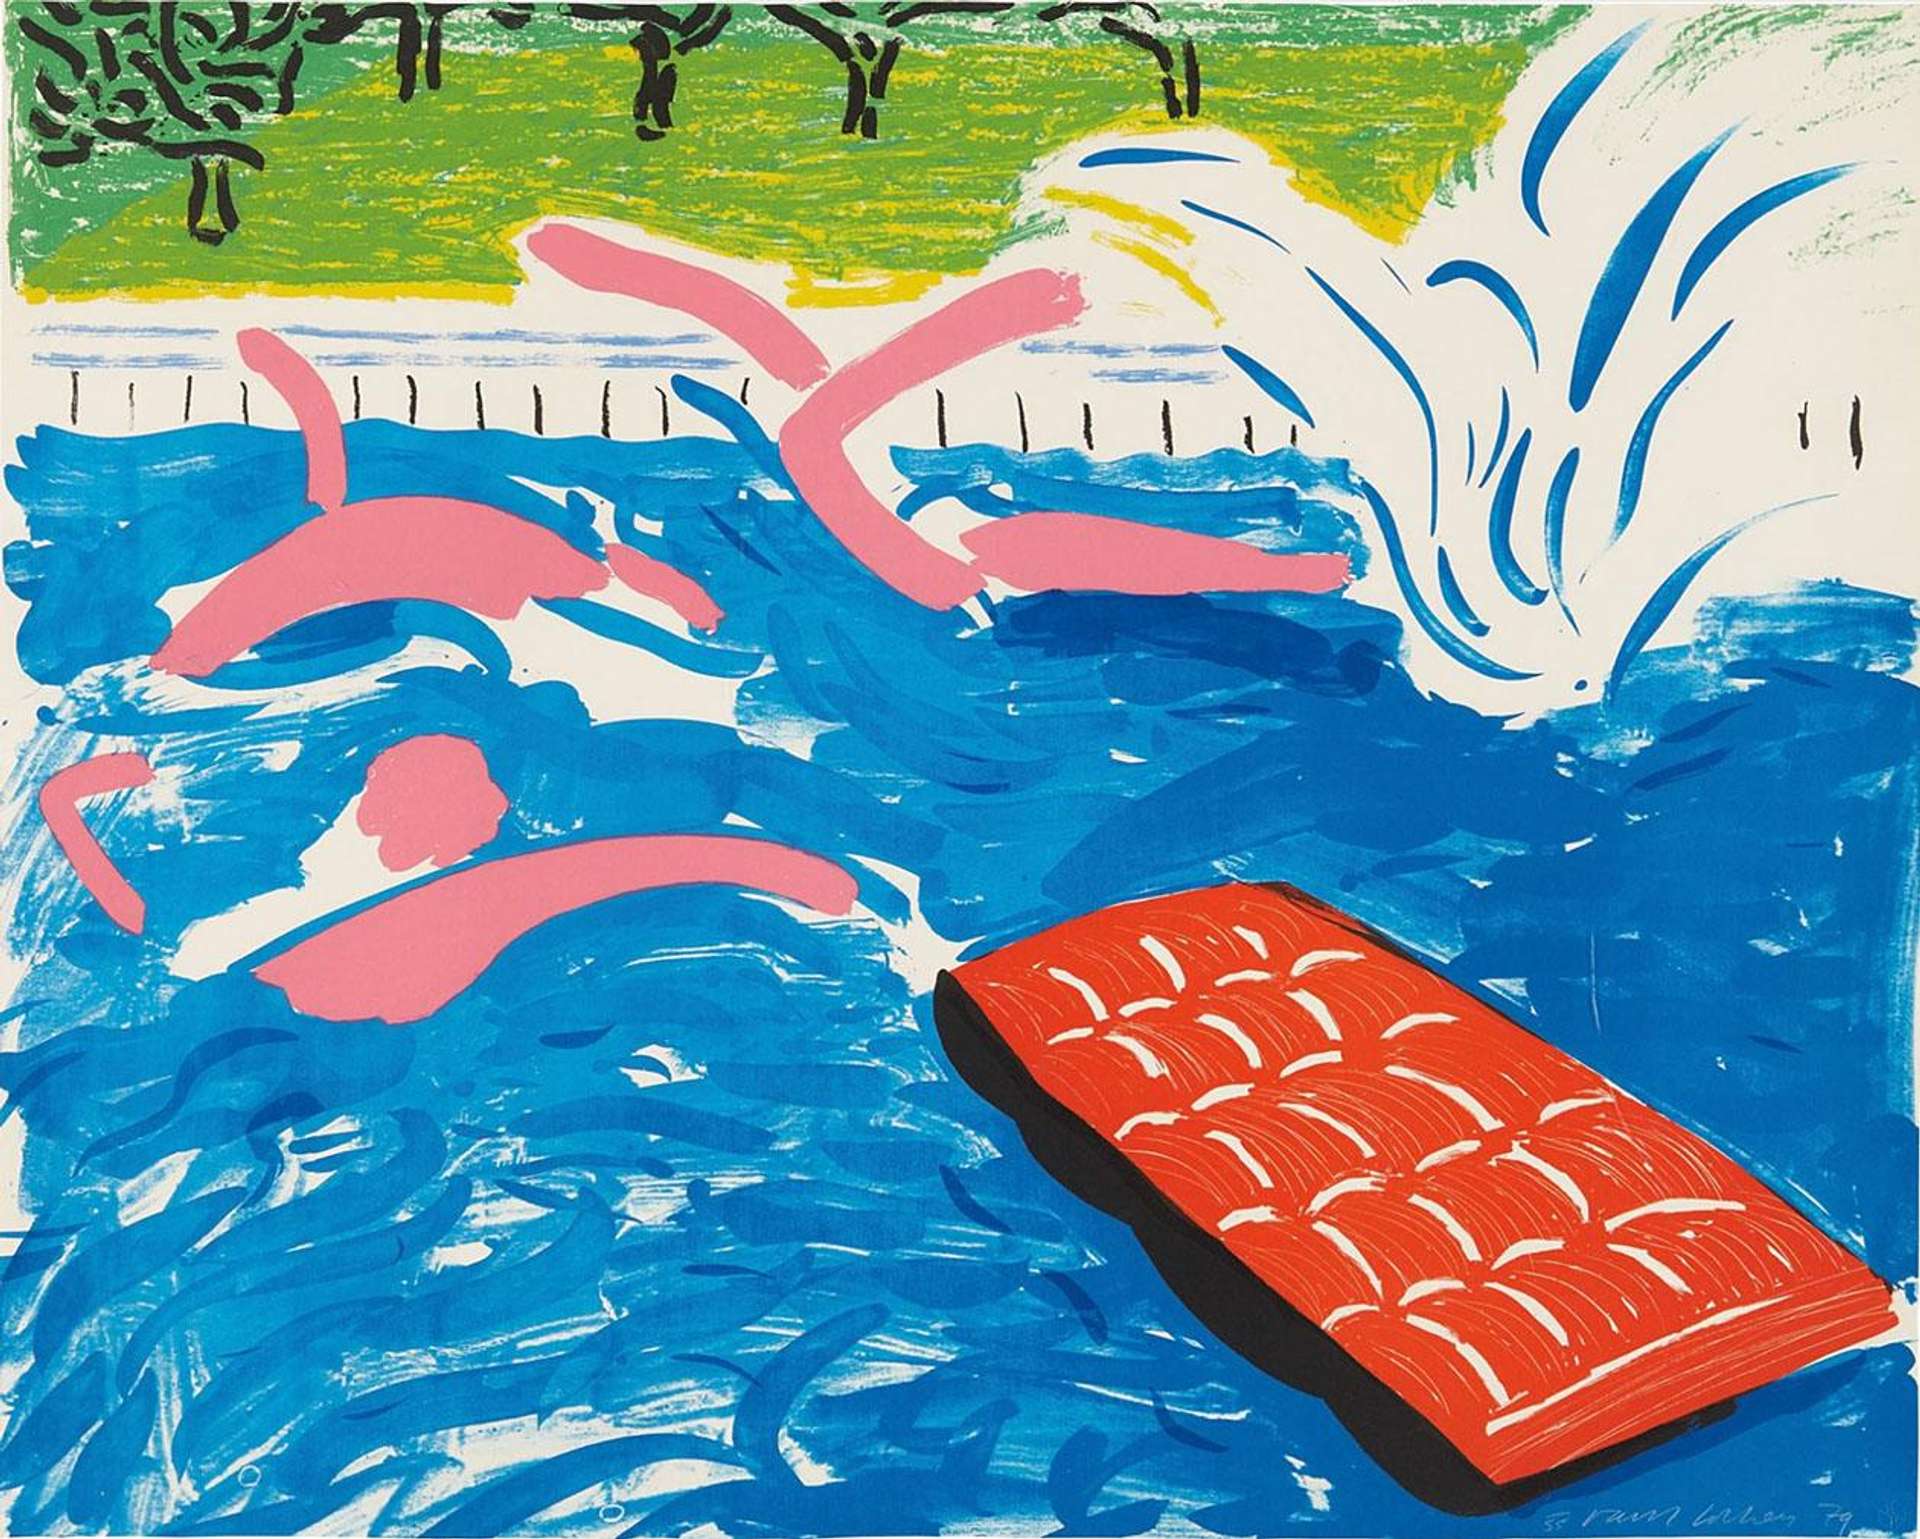 This image shows a pool view by David Hockney, featuring a large orange floatie with surrounding pink splashes.